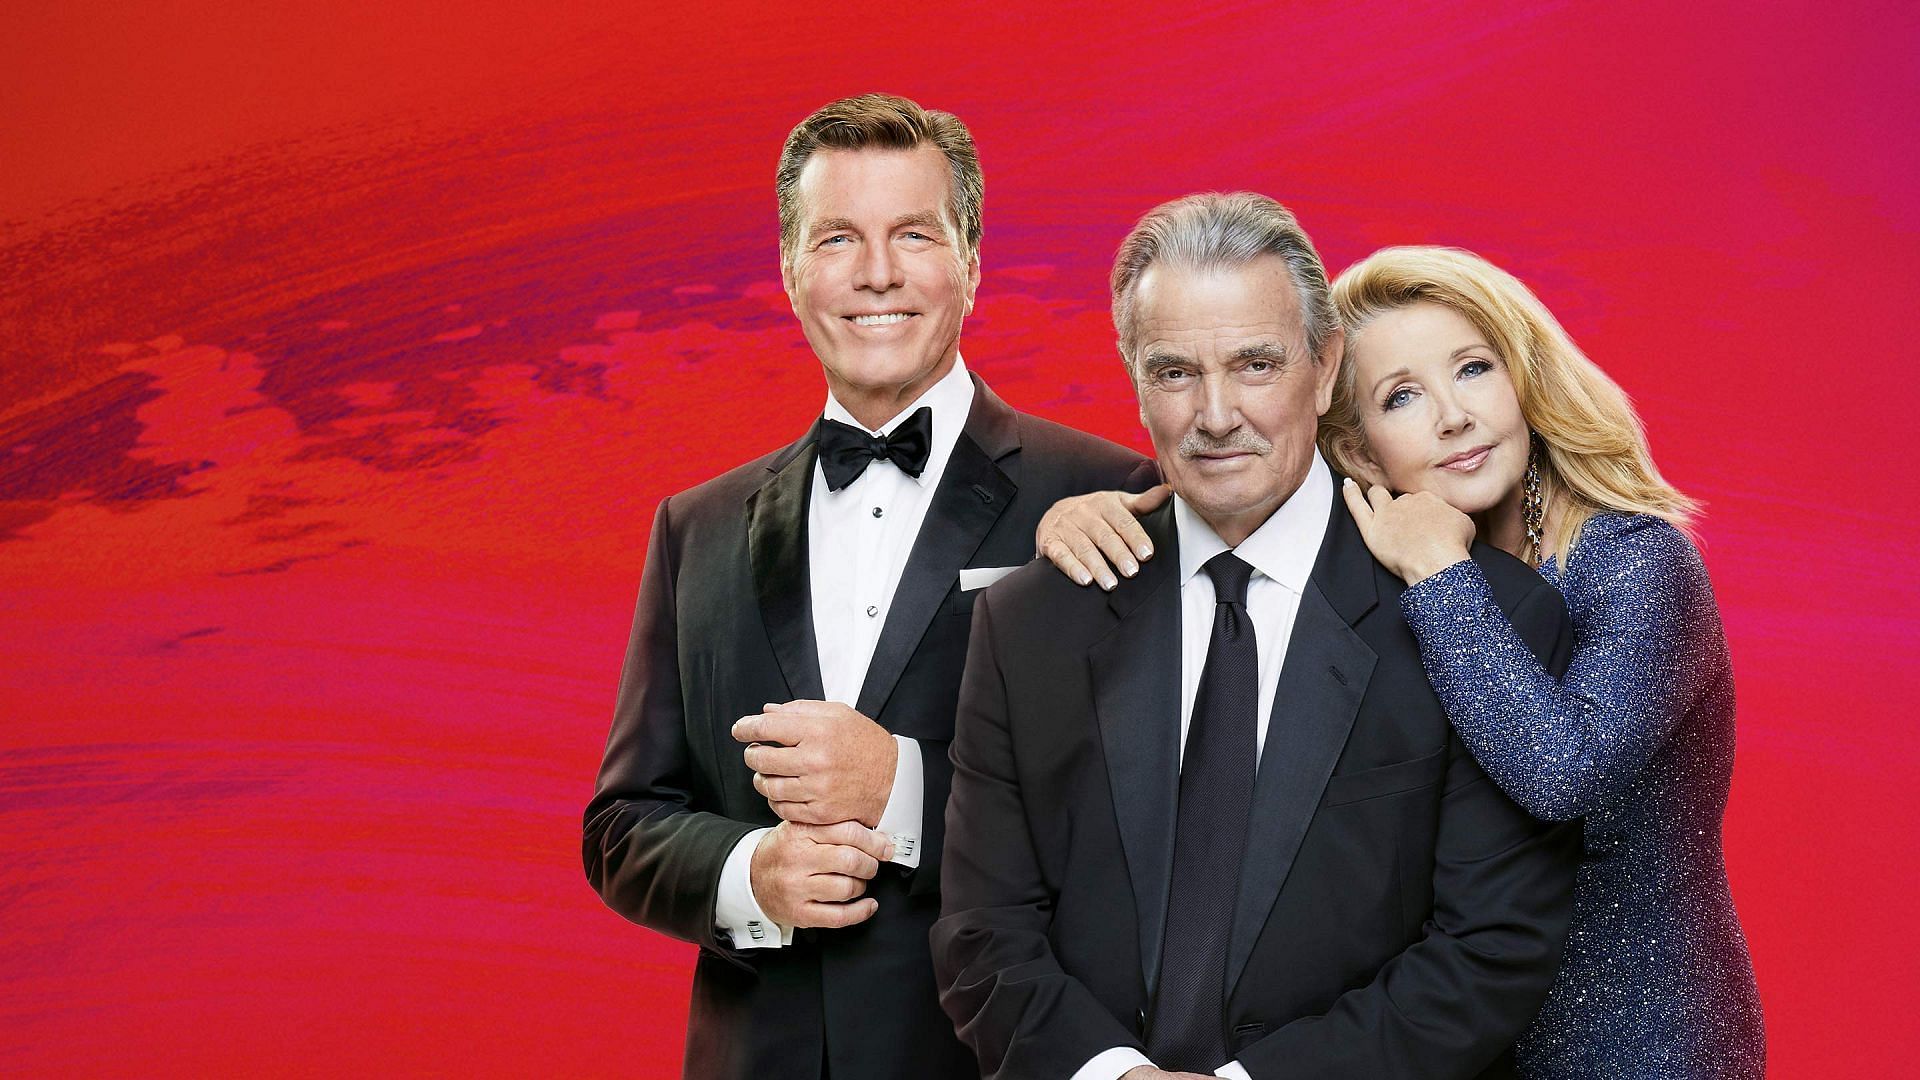 The Young and the Restless (Image via CBS)